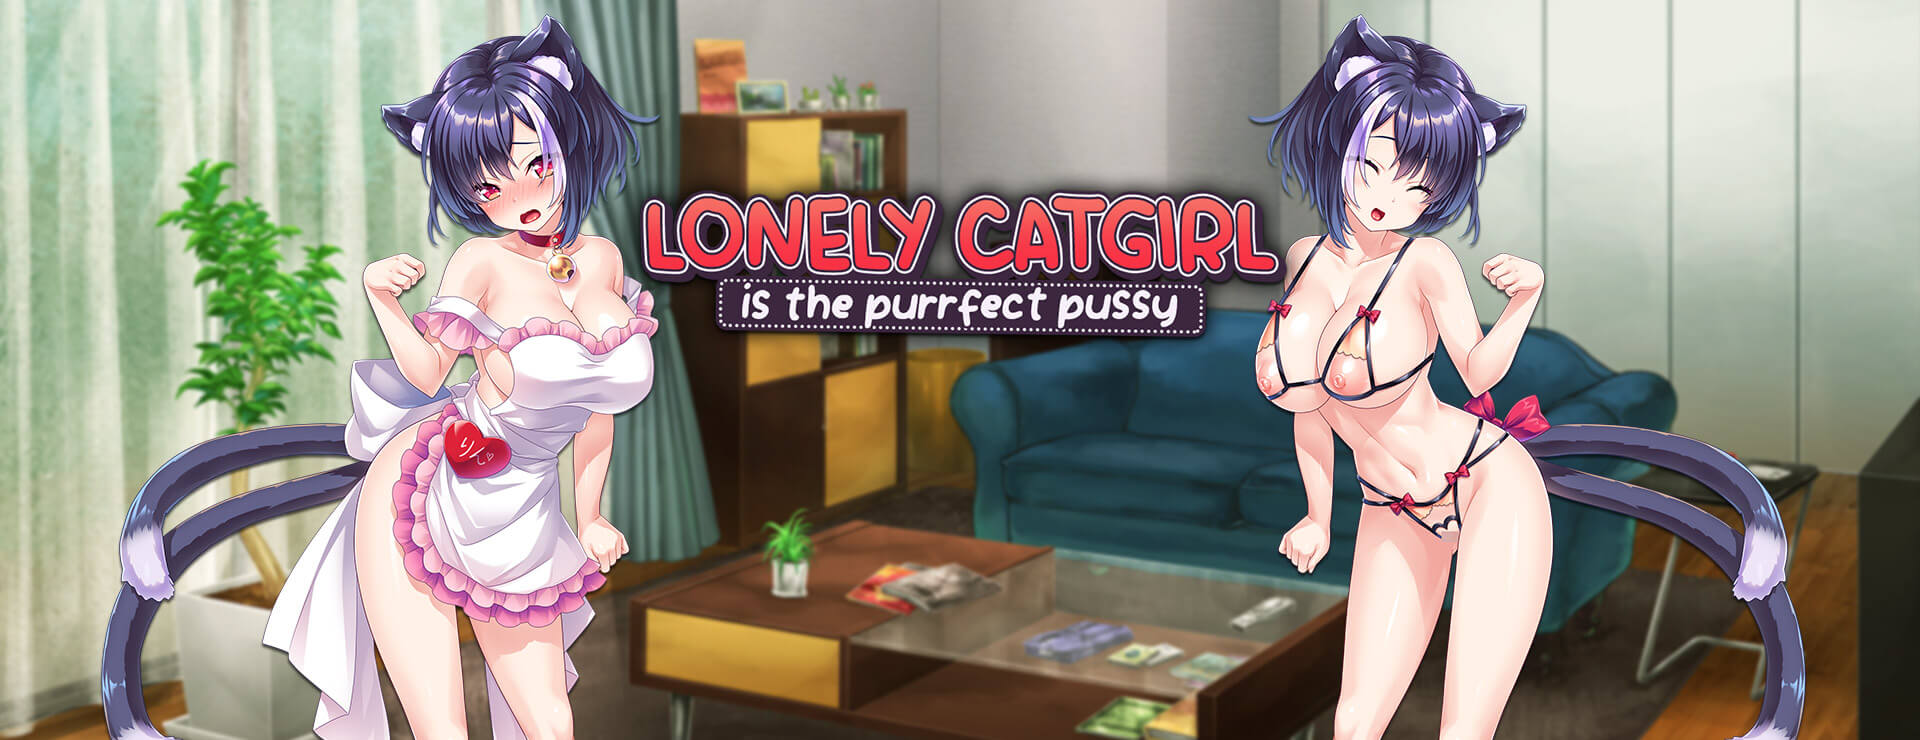 Lonely Catgirl is the Purrfect Pussy - Japanisches Adventure Spiel